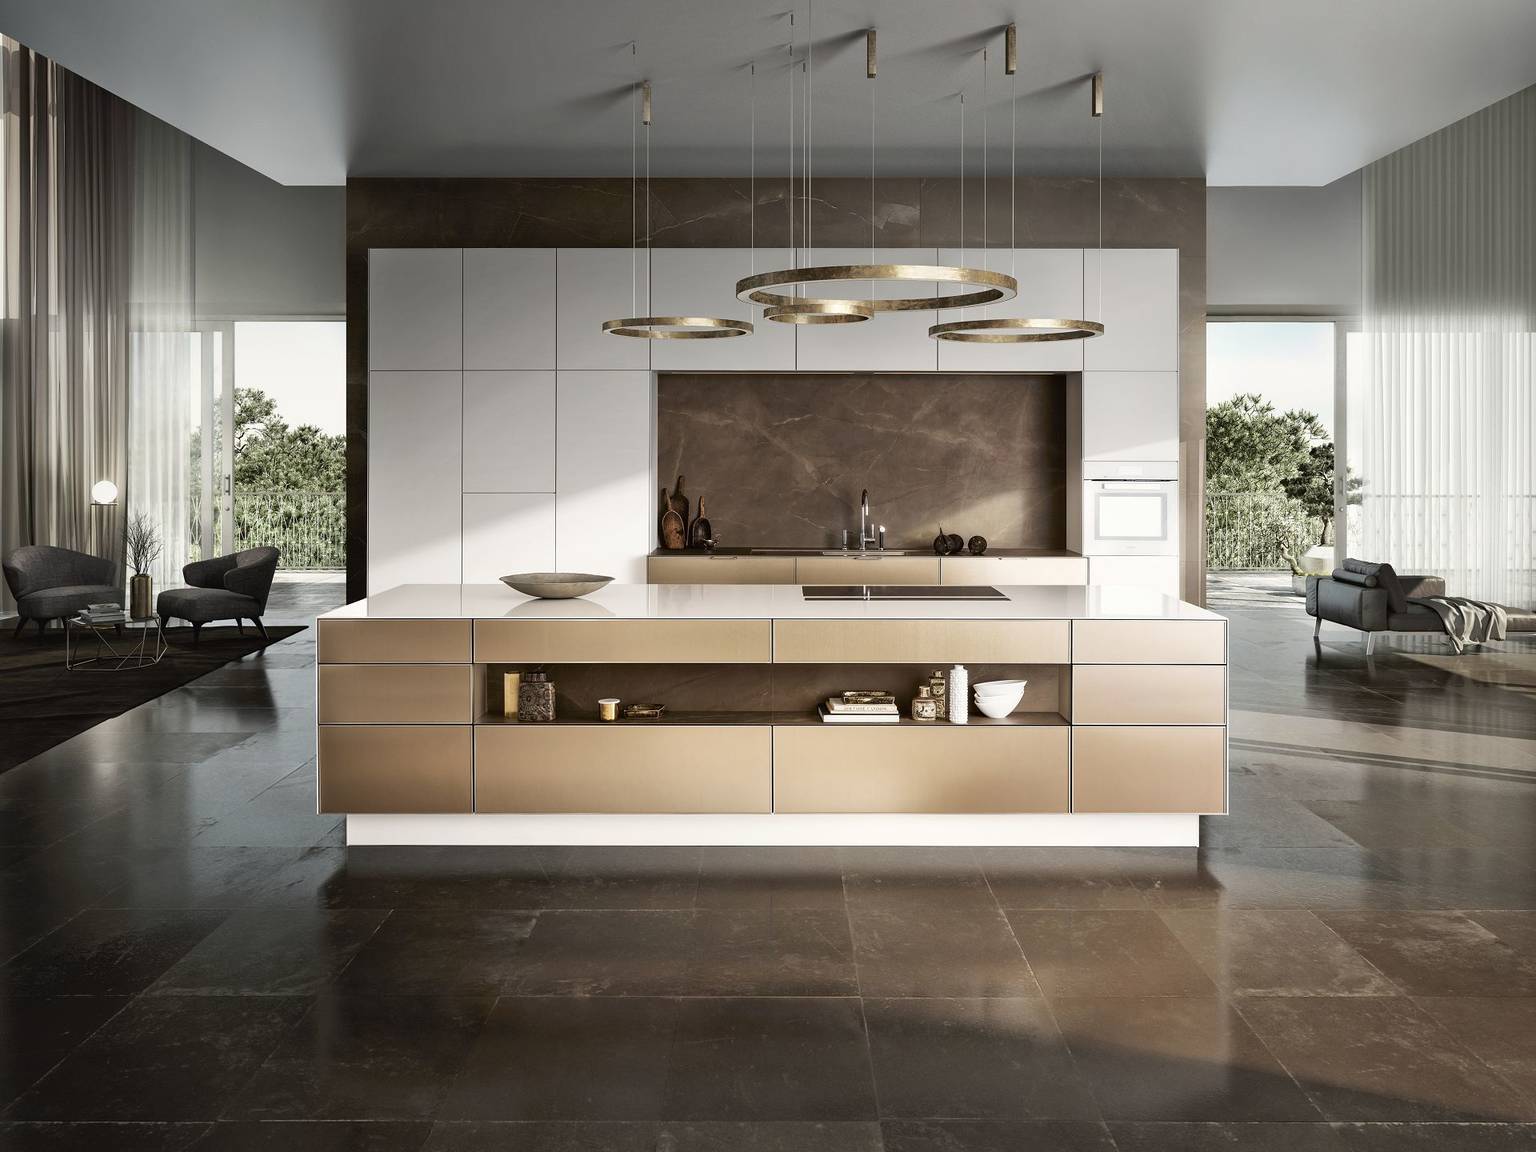 SieMatic Pure SE 3003 R in lotus white and gold bronze with kitchen island